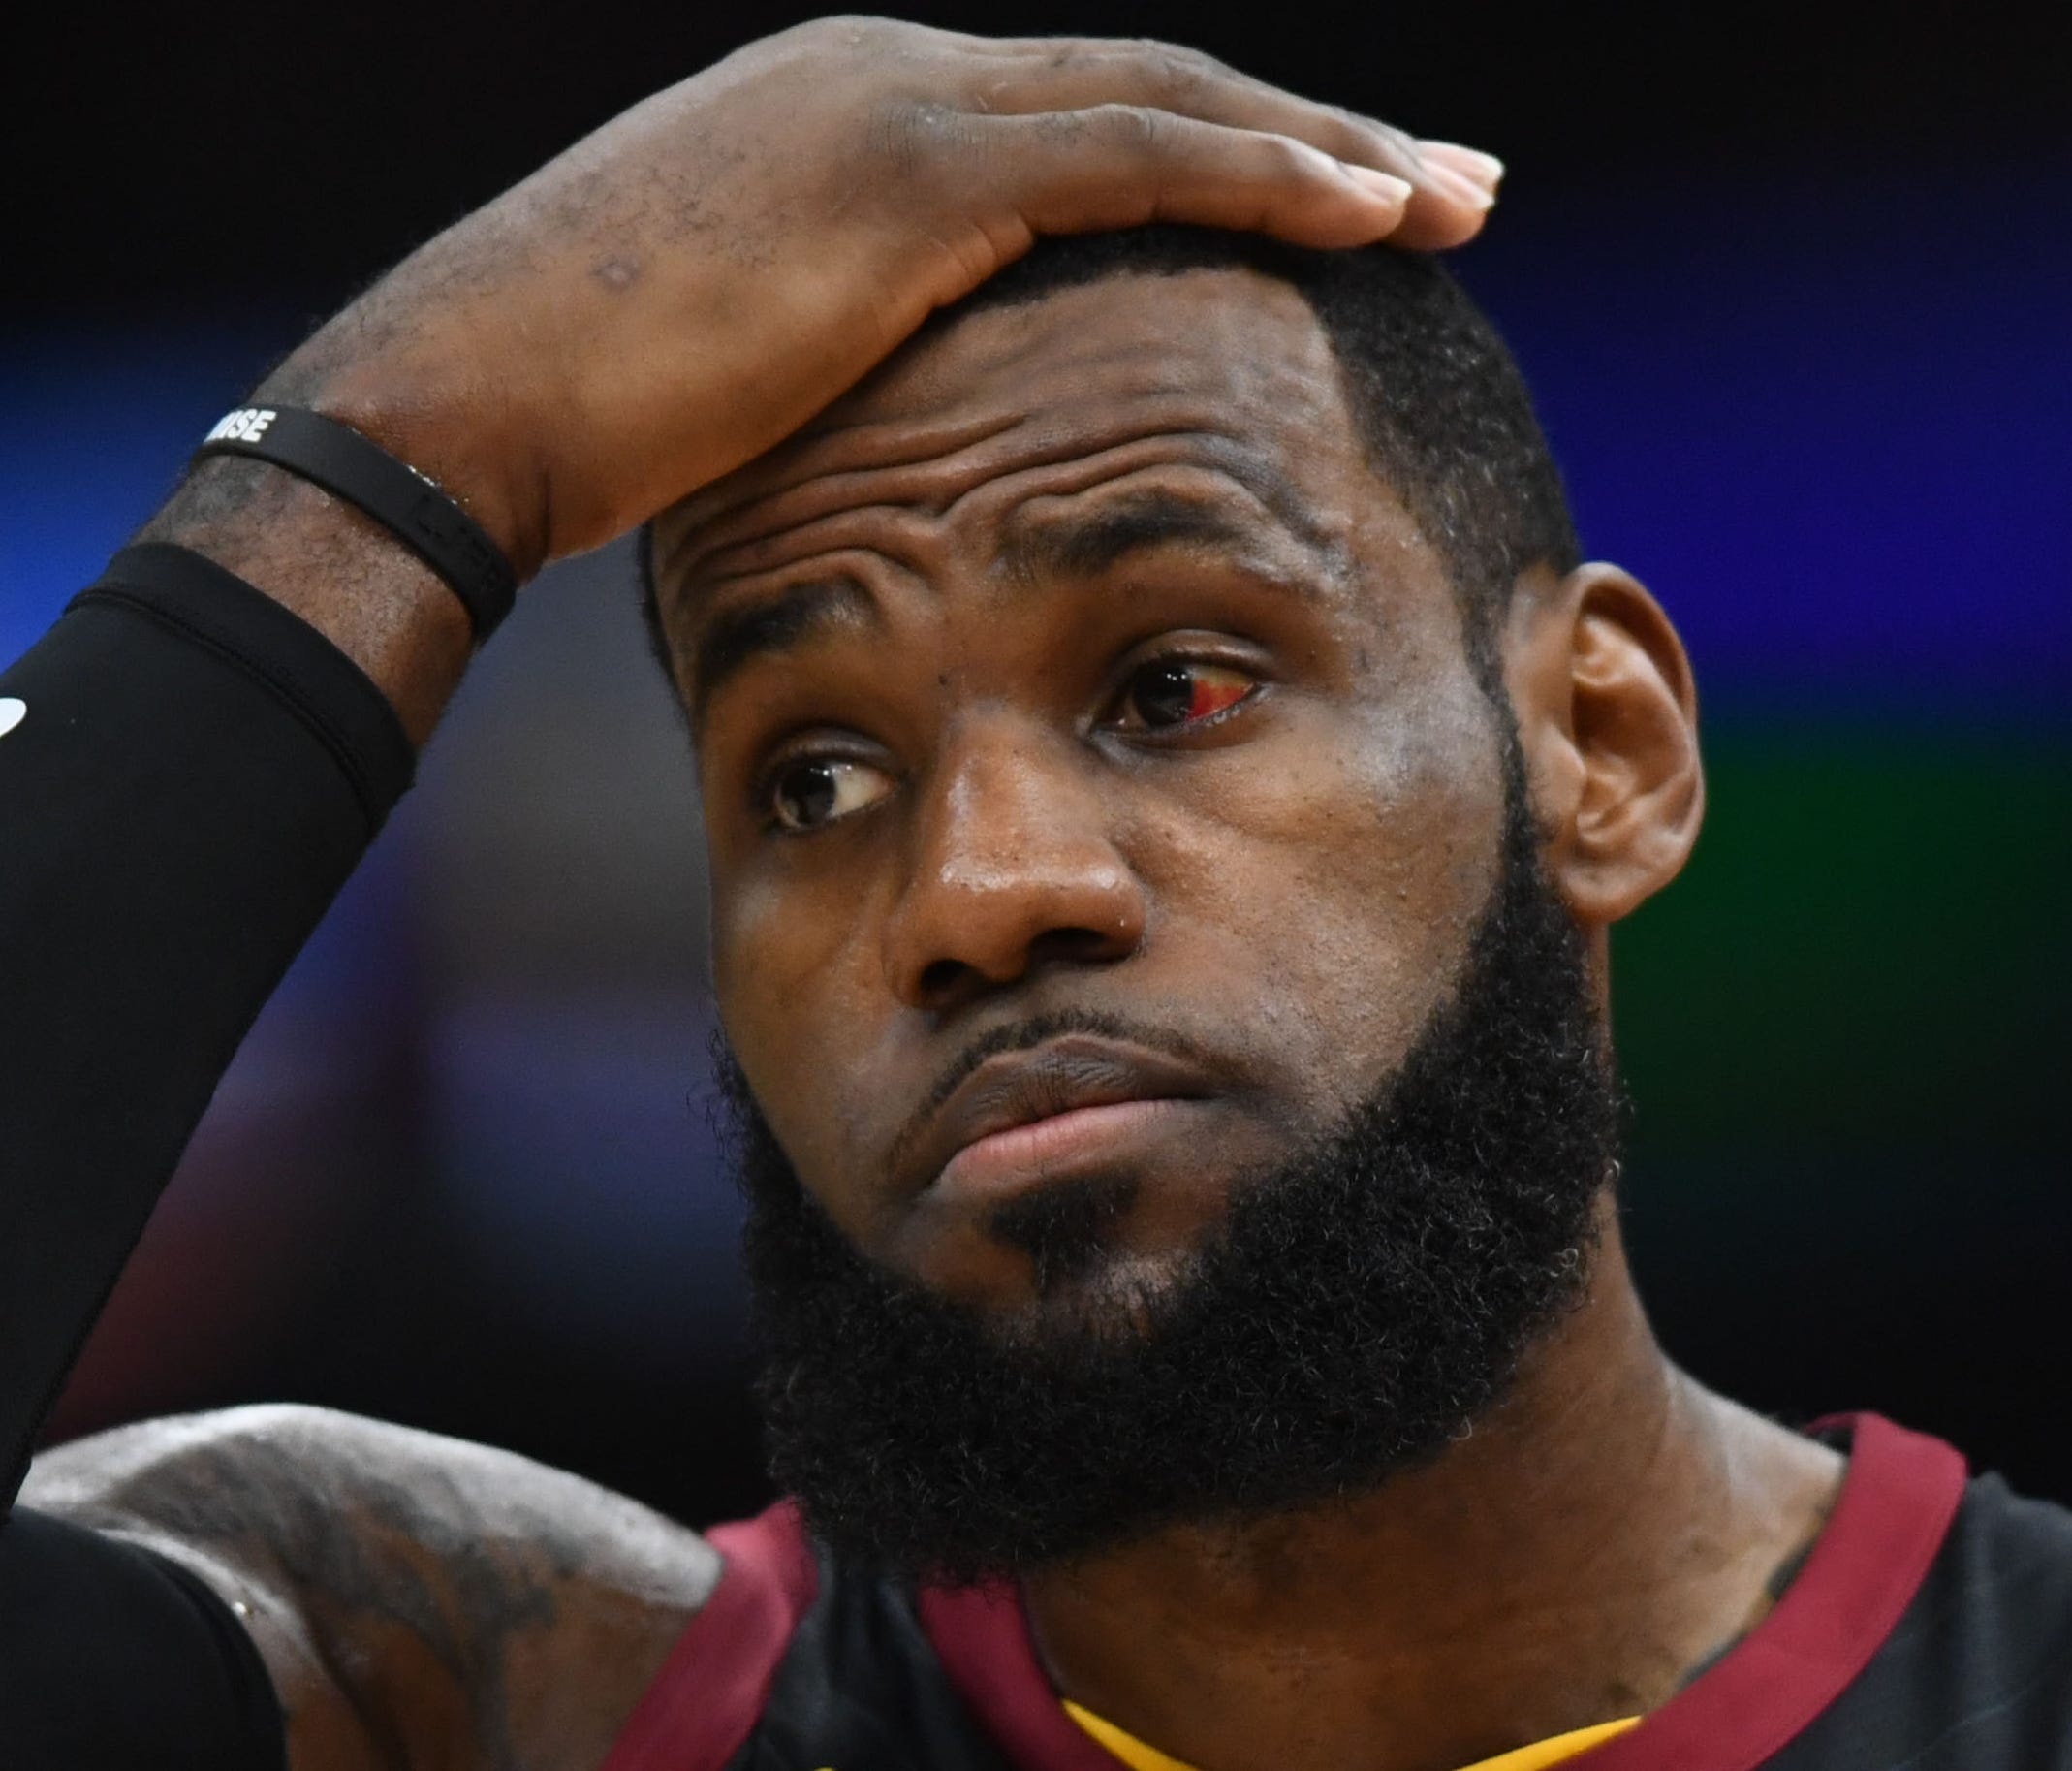 LeBron James and the Cavaliers rocketed to a quick start, but could not hold off the Warriors in the fourth quarter.